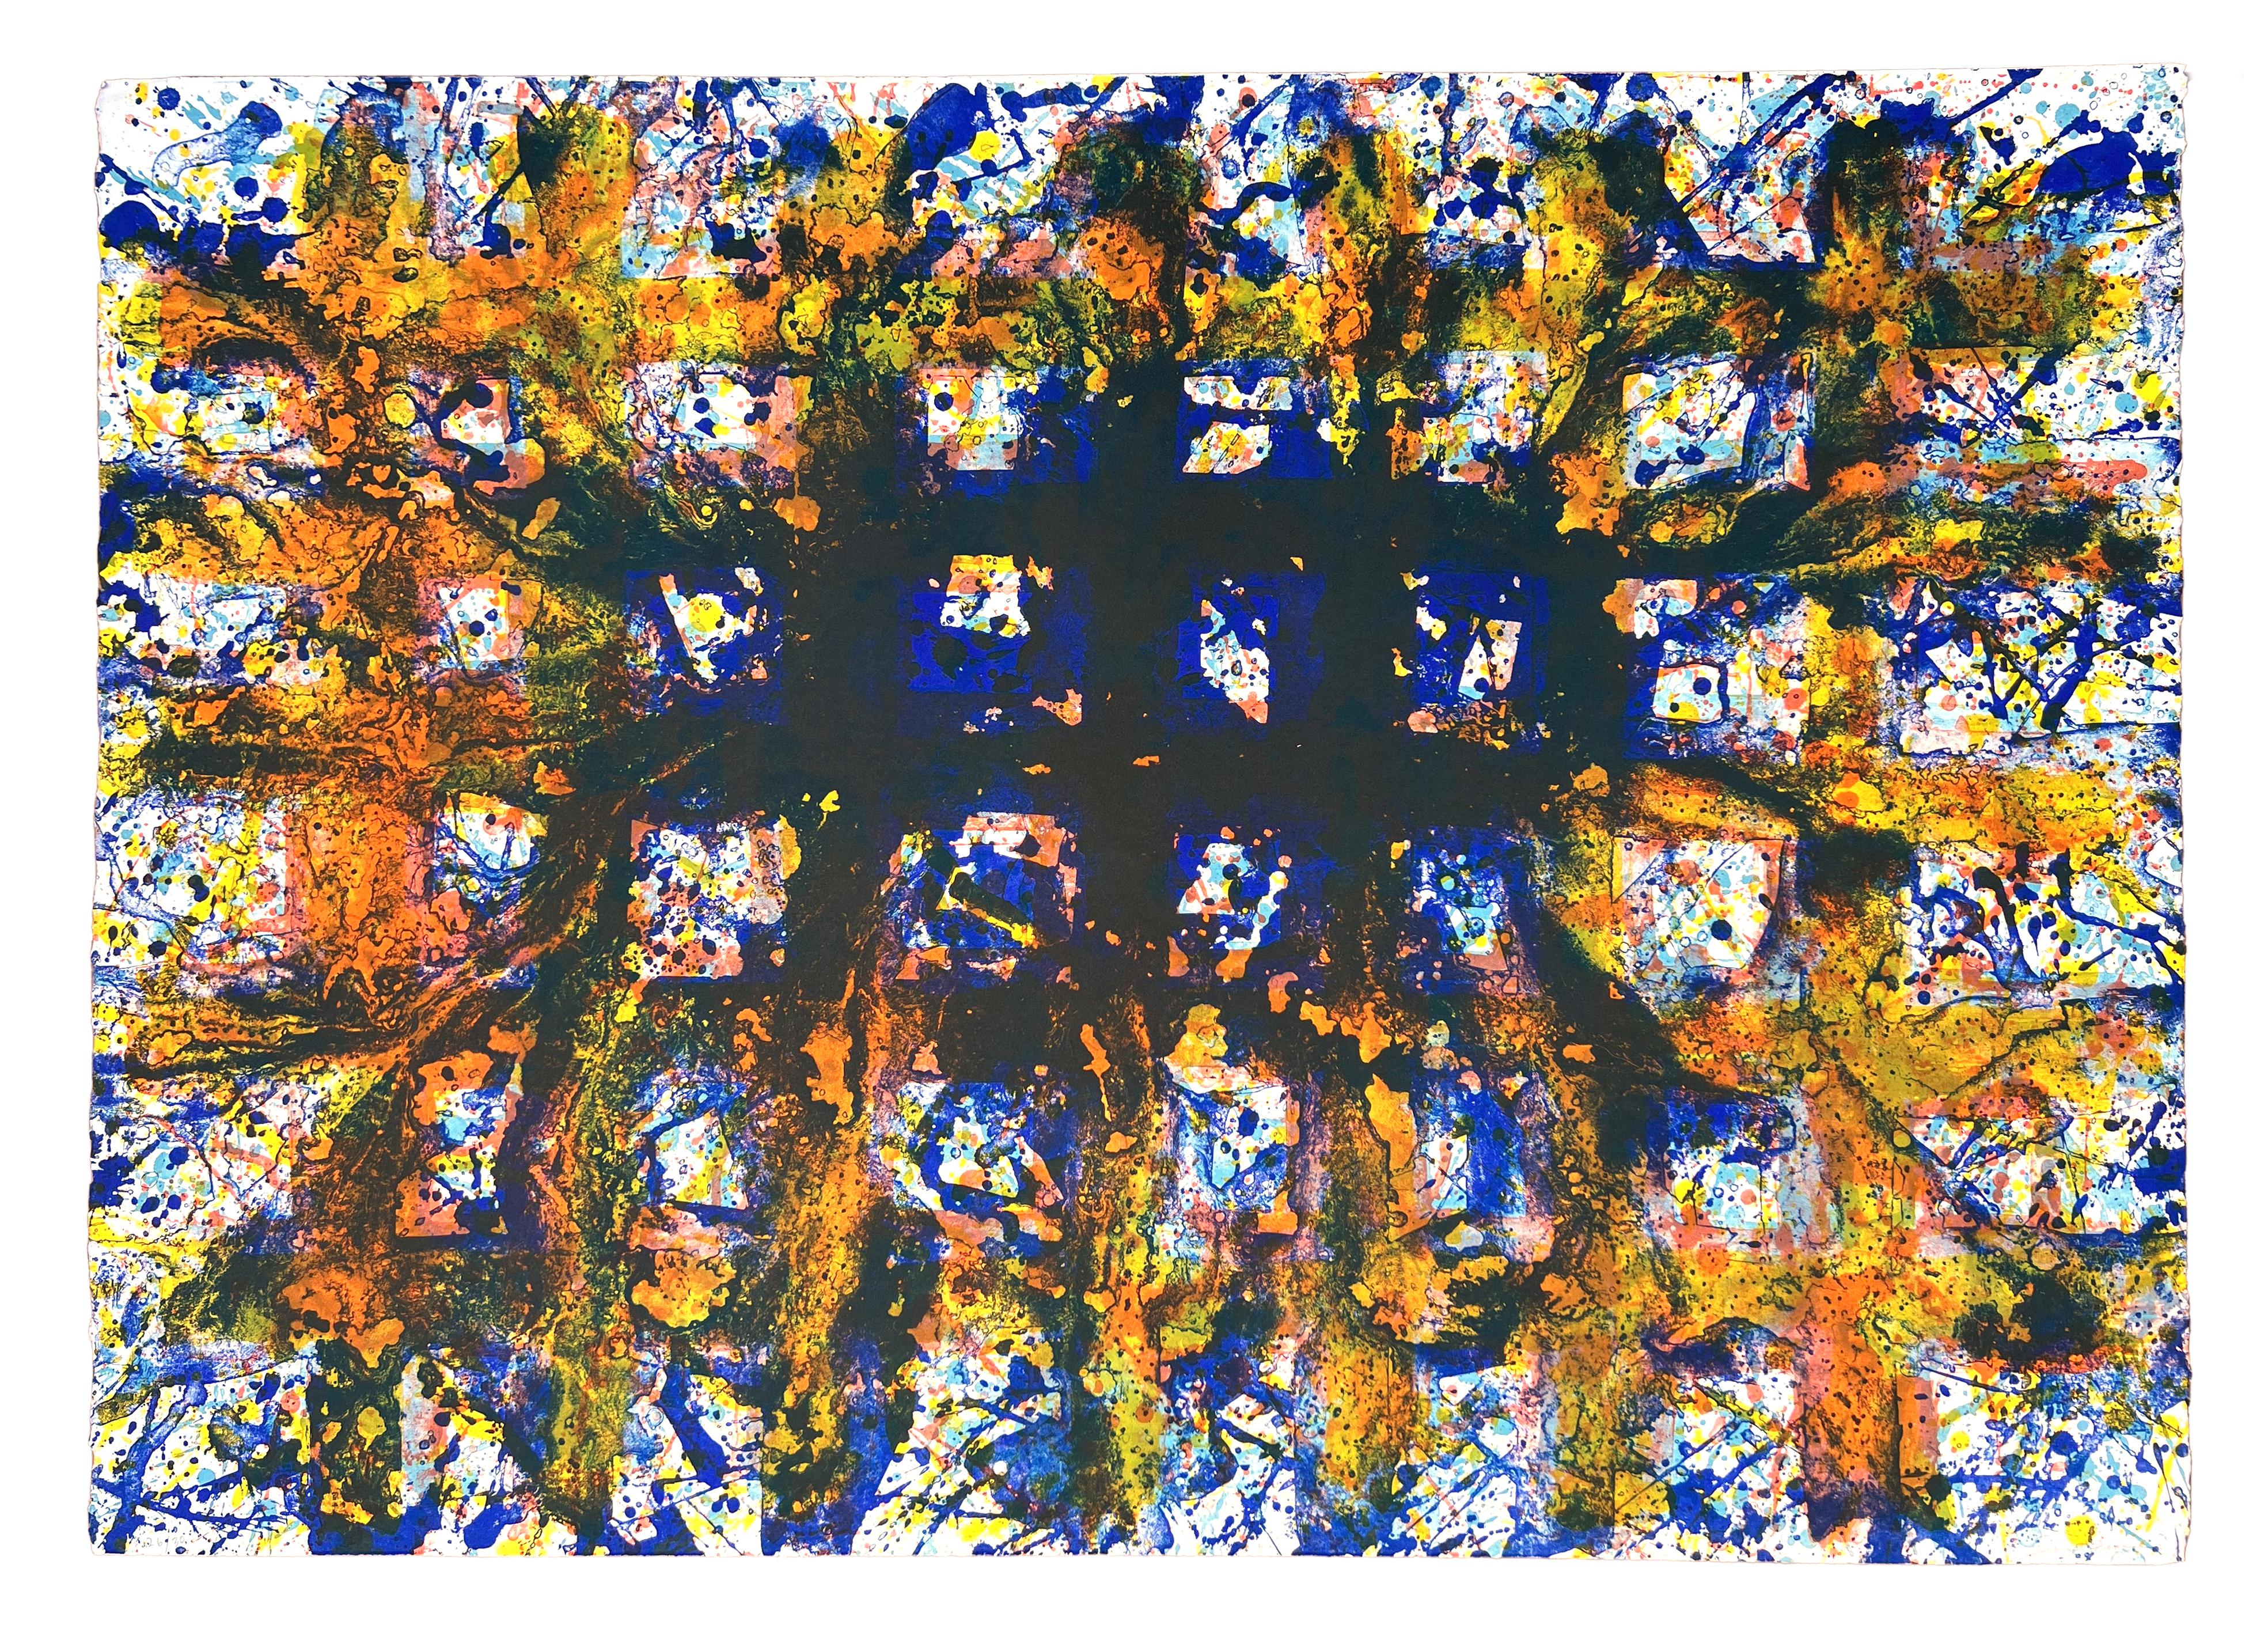 Untitled is an original artwork realized by Sam Francis in 1979.

Mixed colored lithograph on BFK Rives paper.

Hand signed and numbered on the lower left margin. Edition 26/30.

The Litho Shop, publisher and printer, Santa Monica, California.

Ref.